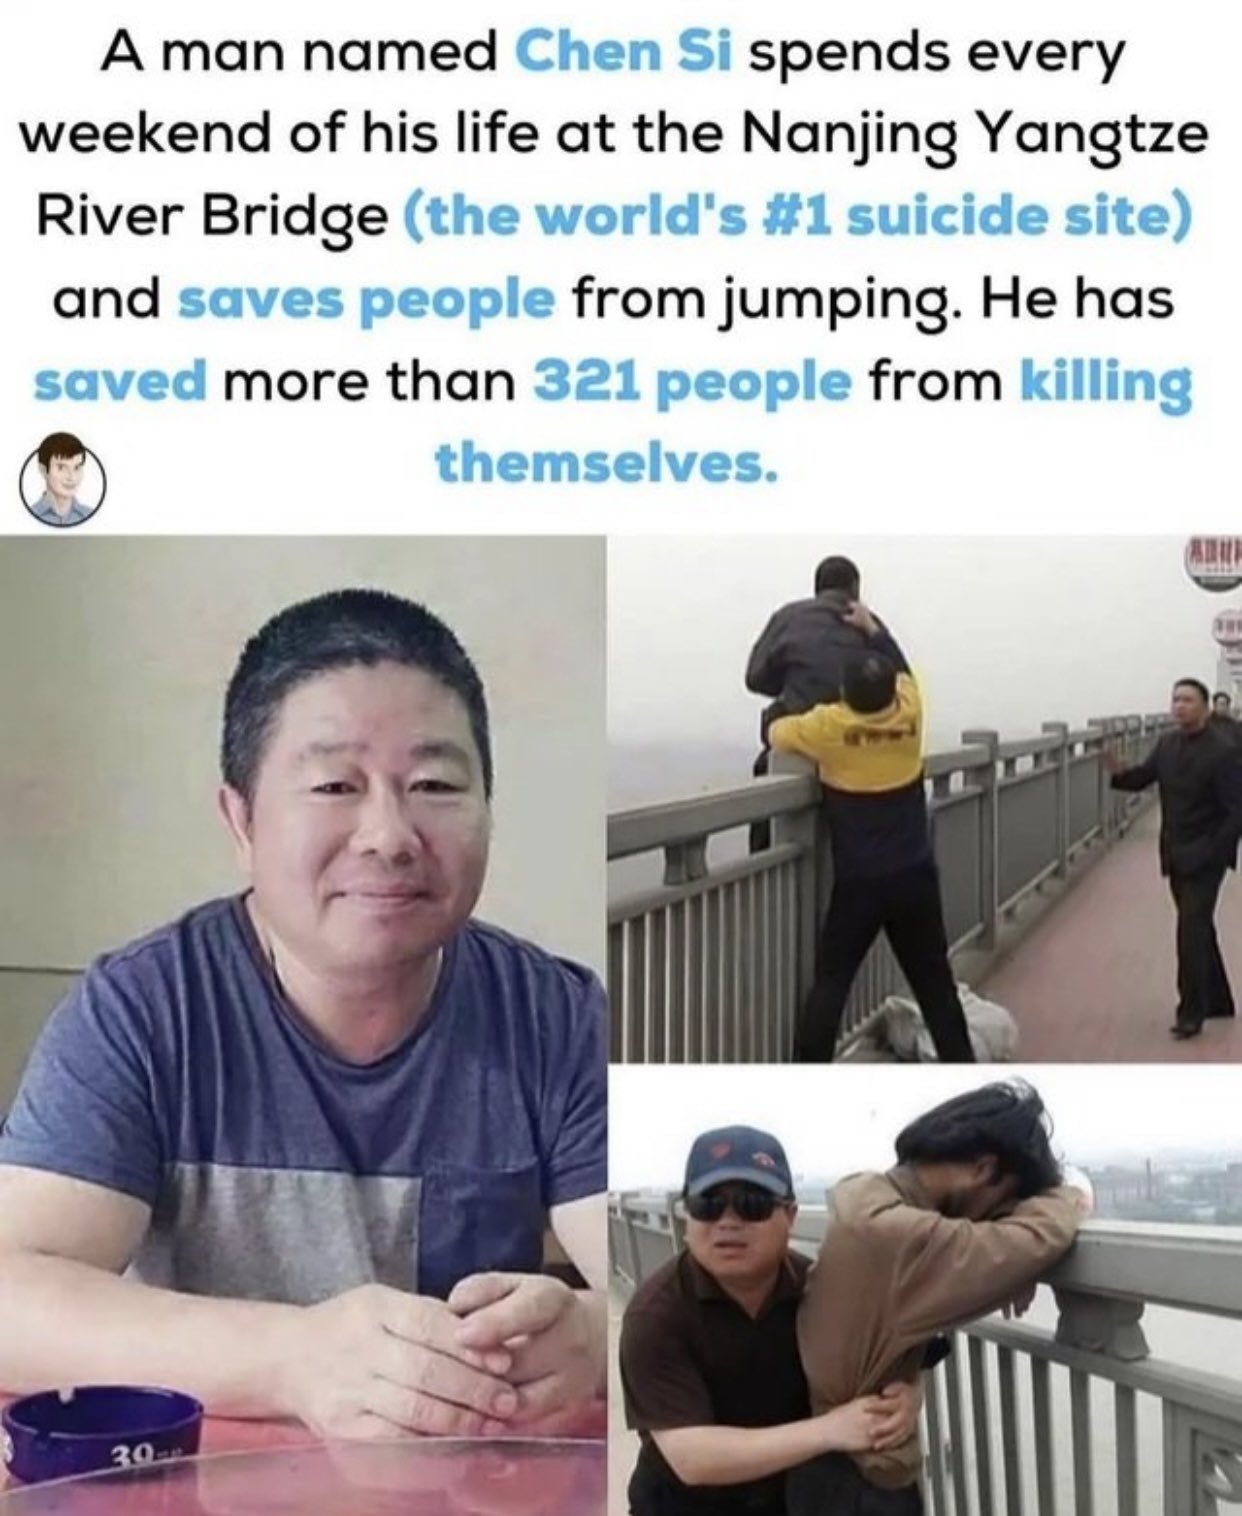 Dudes posting their wins - r damn thats interesting - A man named Chen Si spends every weekend of his life at the Nanjing Yangtze River Bridge the world's sicide site and saves people from jumping. He has saved more than 321 people from killing themselves